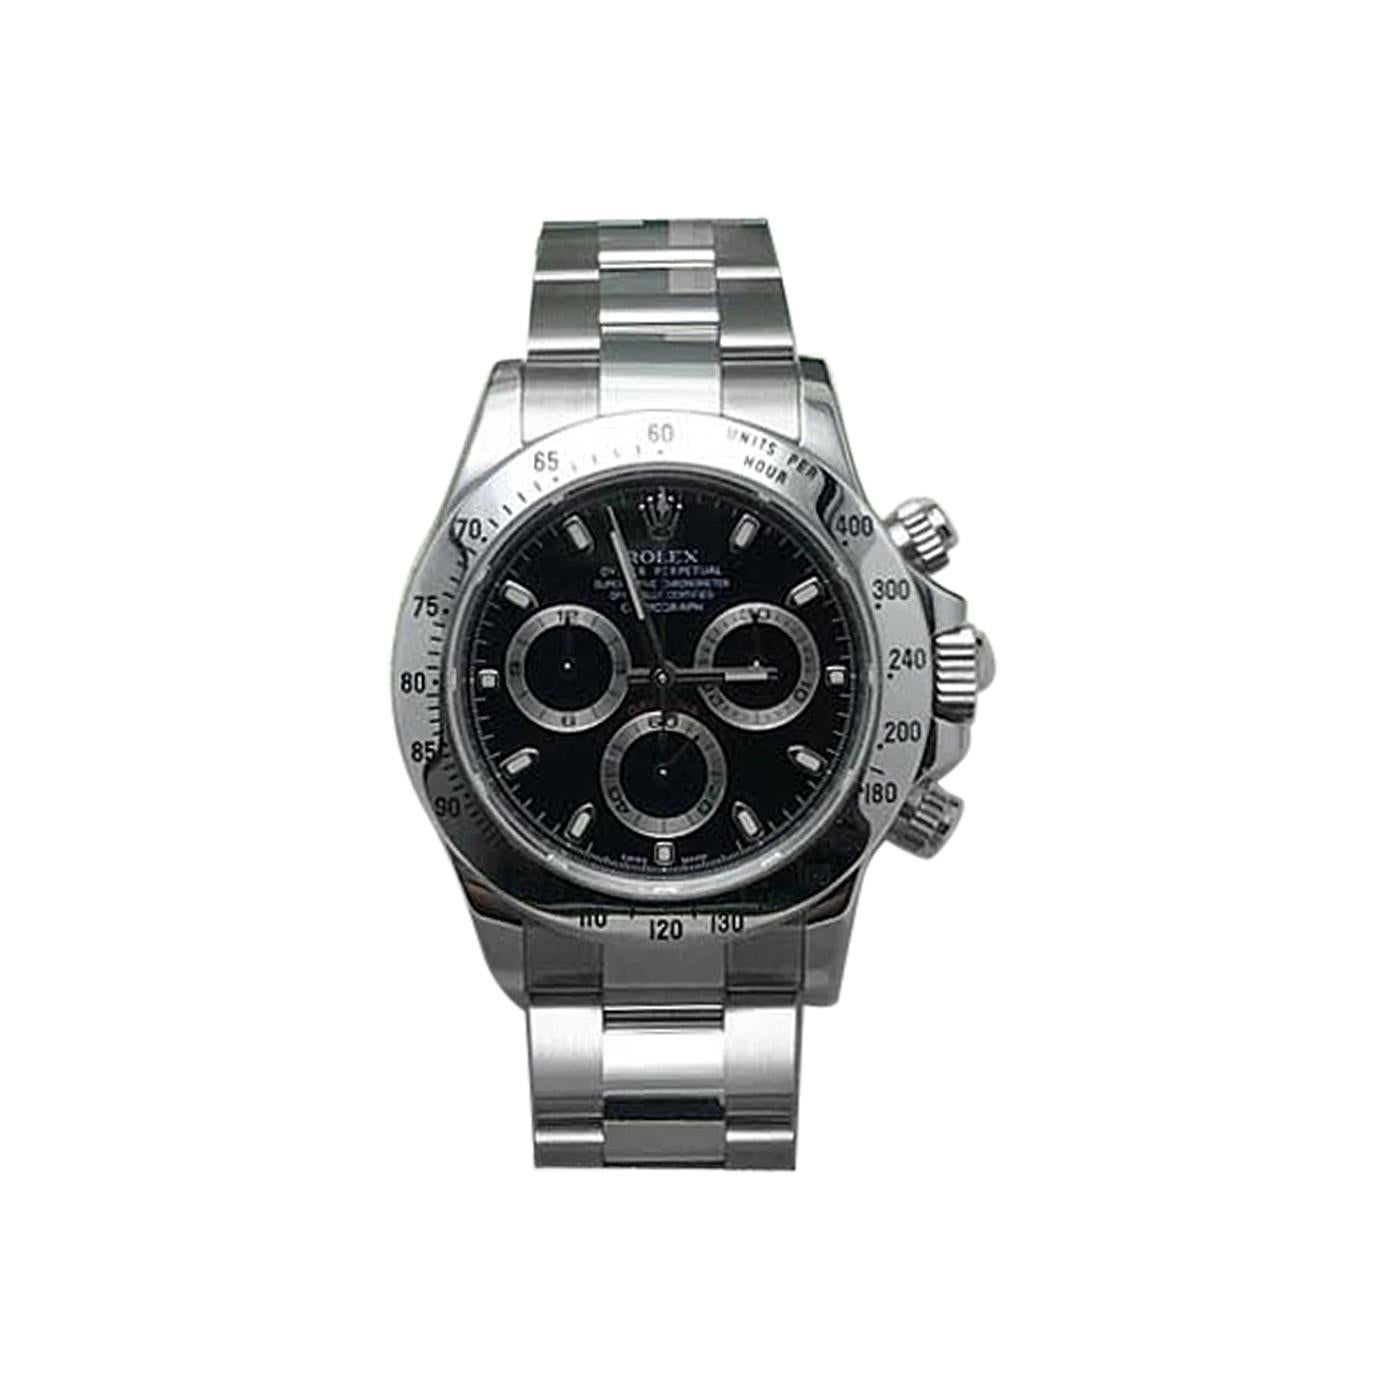 Rolex Daytona 116520 Black Dial Stainless Steel Box and Papers, 2010